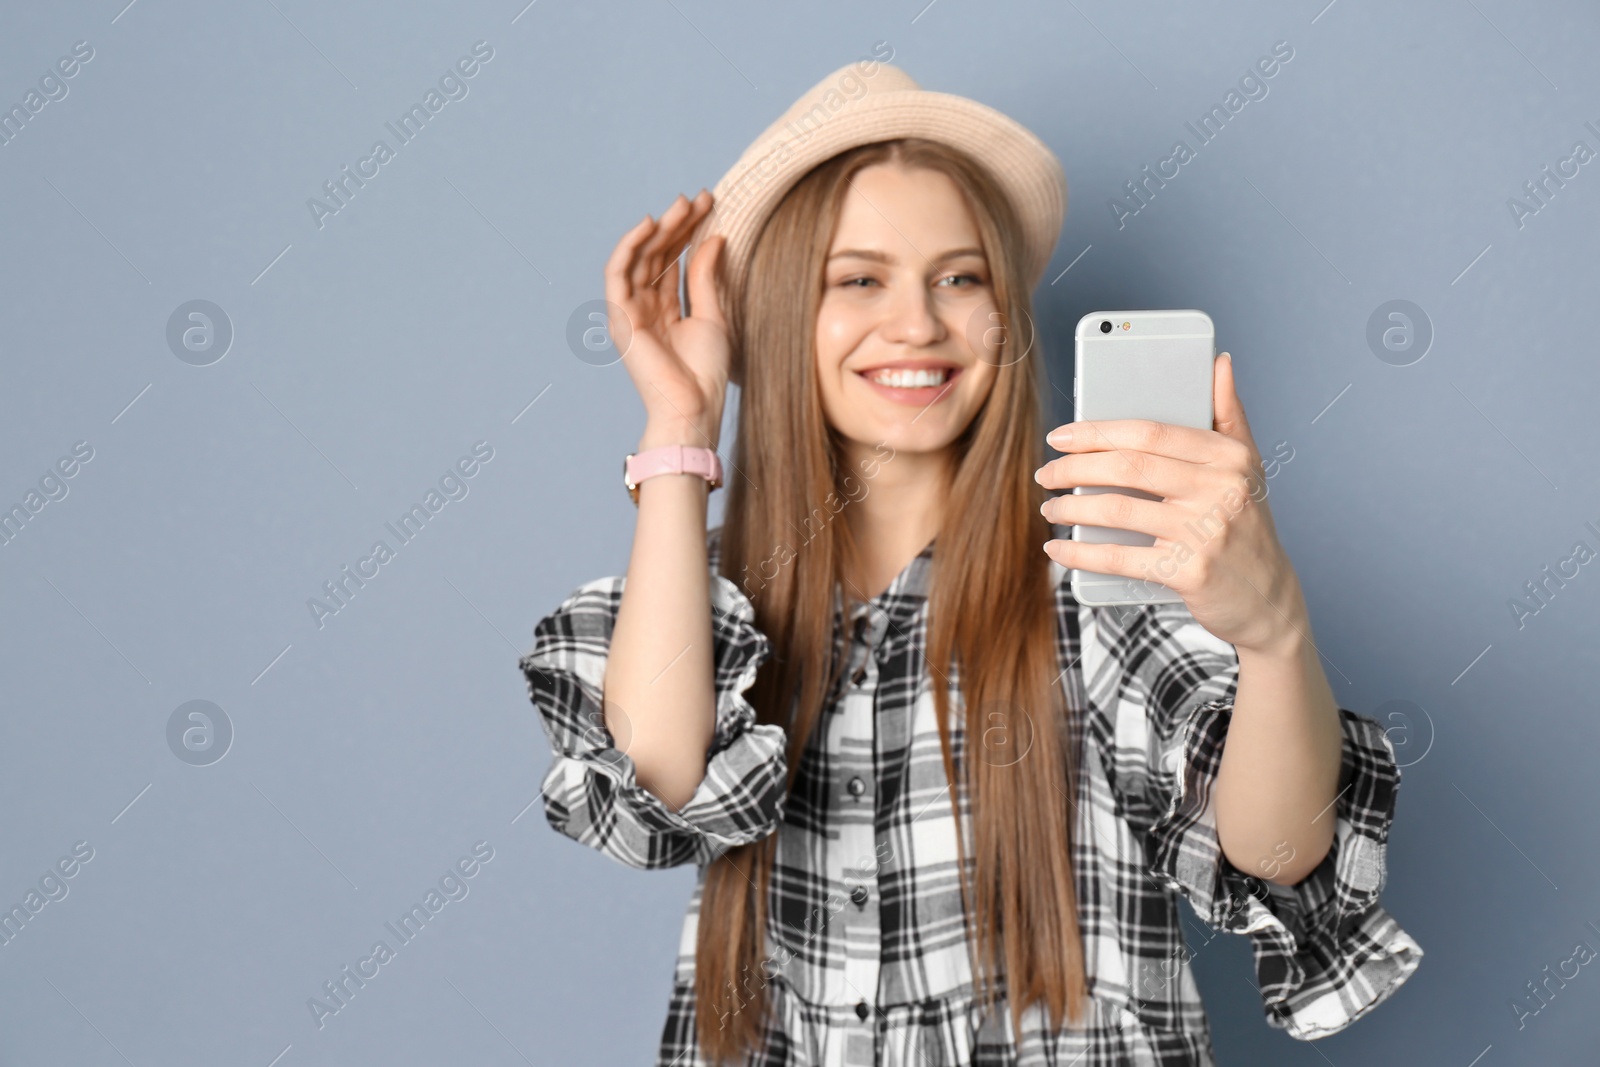 Photo of Young beautiful woman taking selfie against grey background